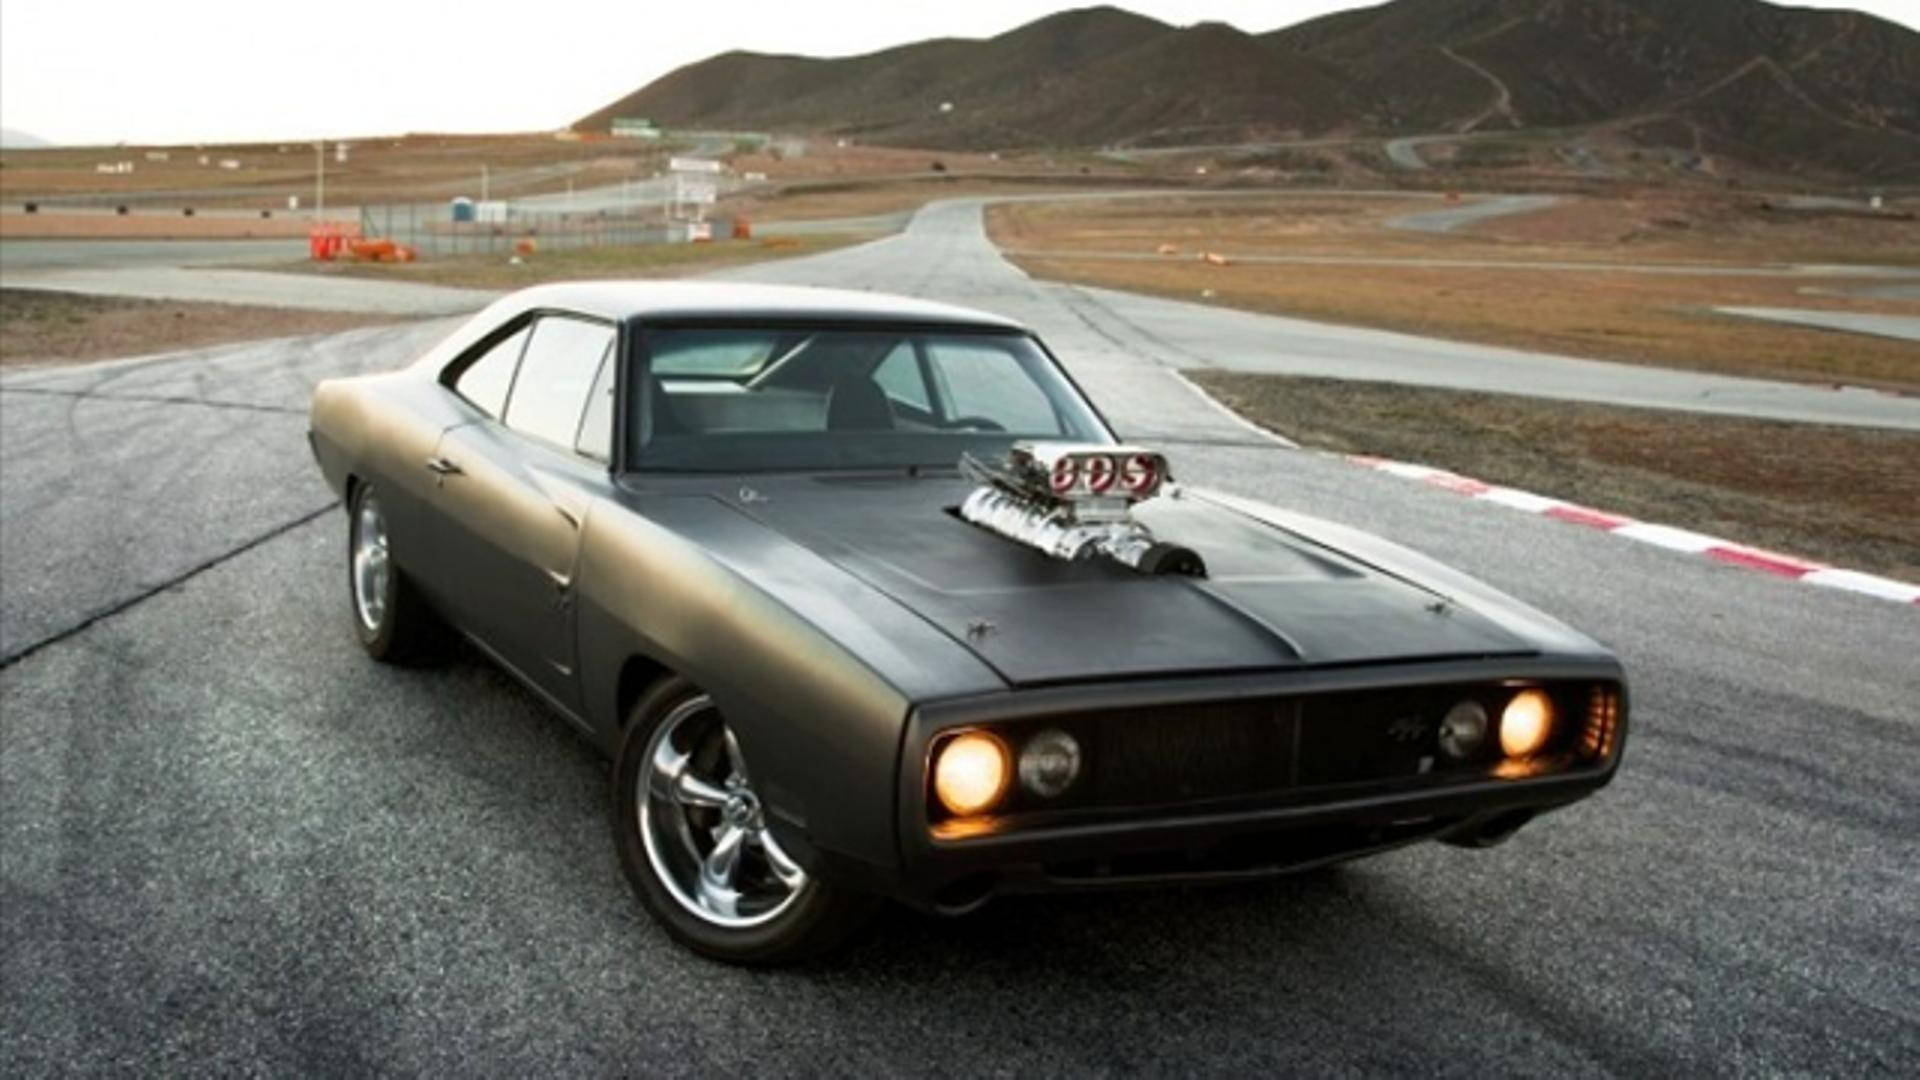 A Black Muscle Car Is Driving Down A Road Wallpaper